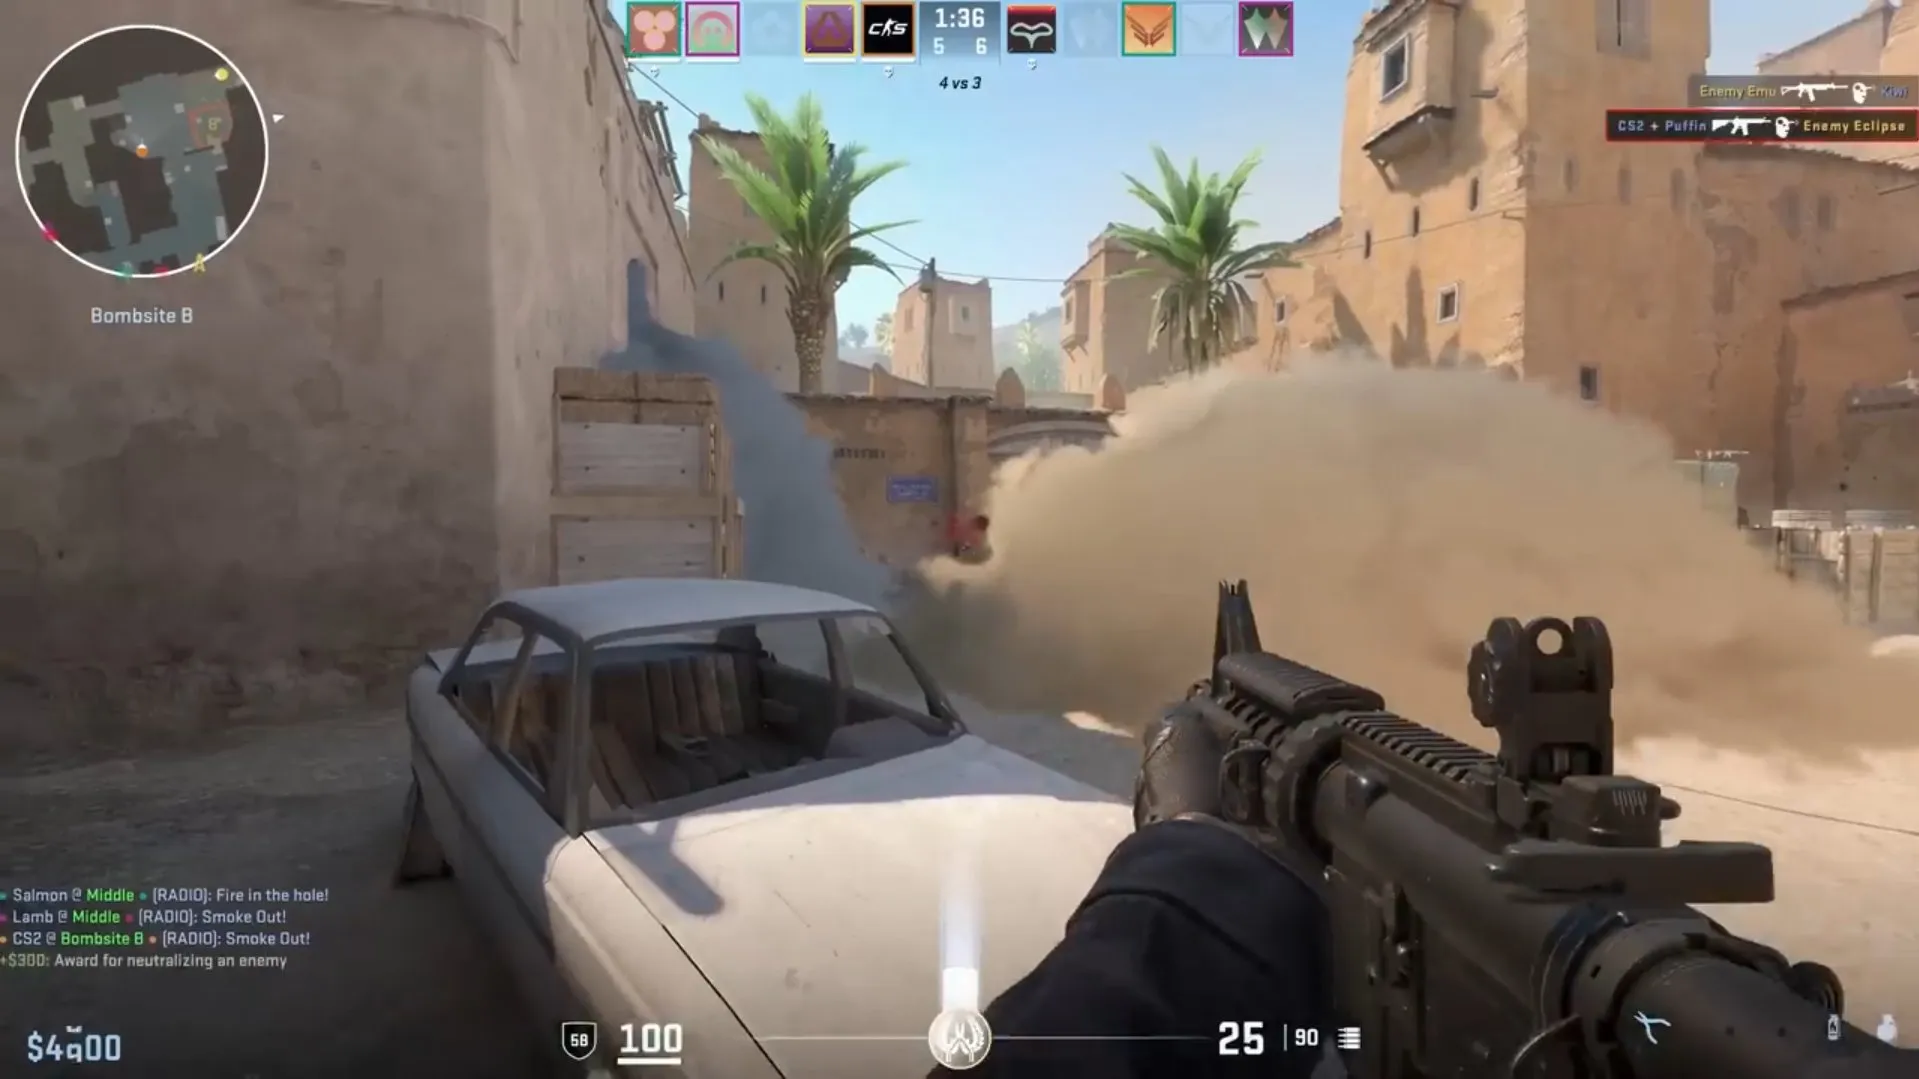 How to download CS:GO on Steam after the release of CS2